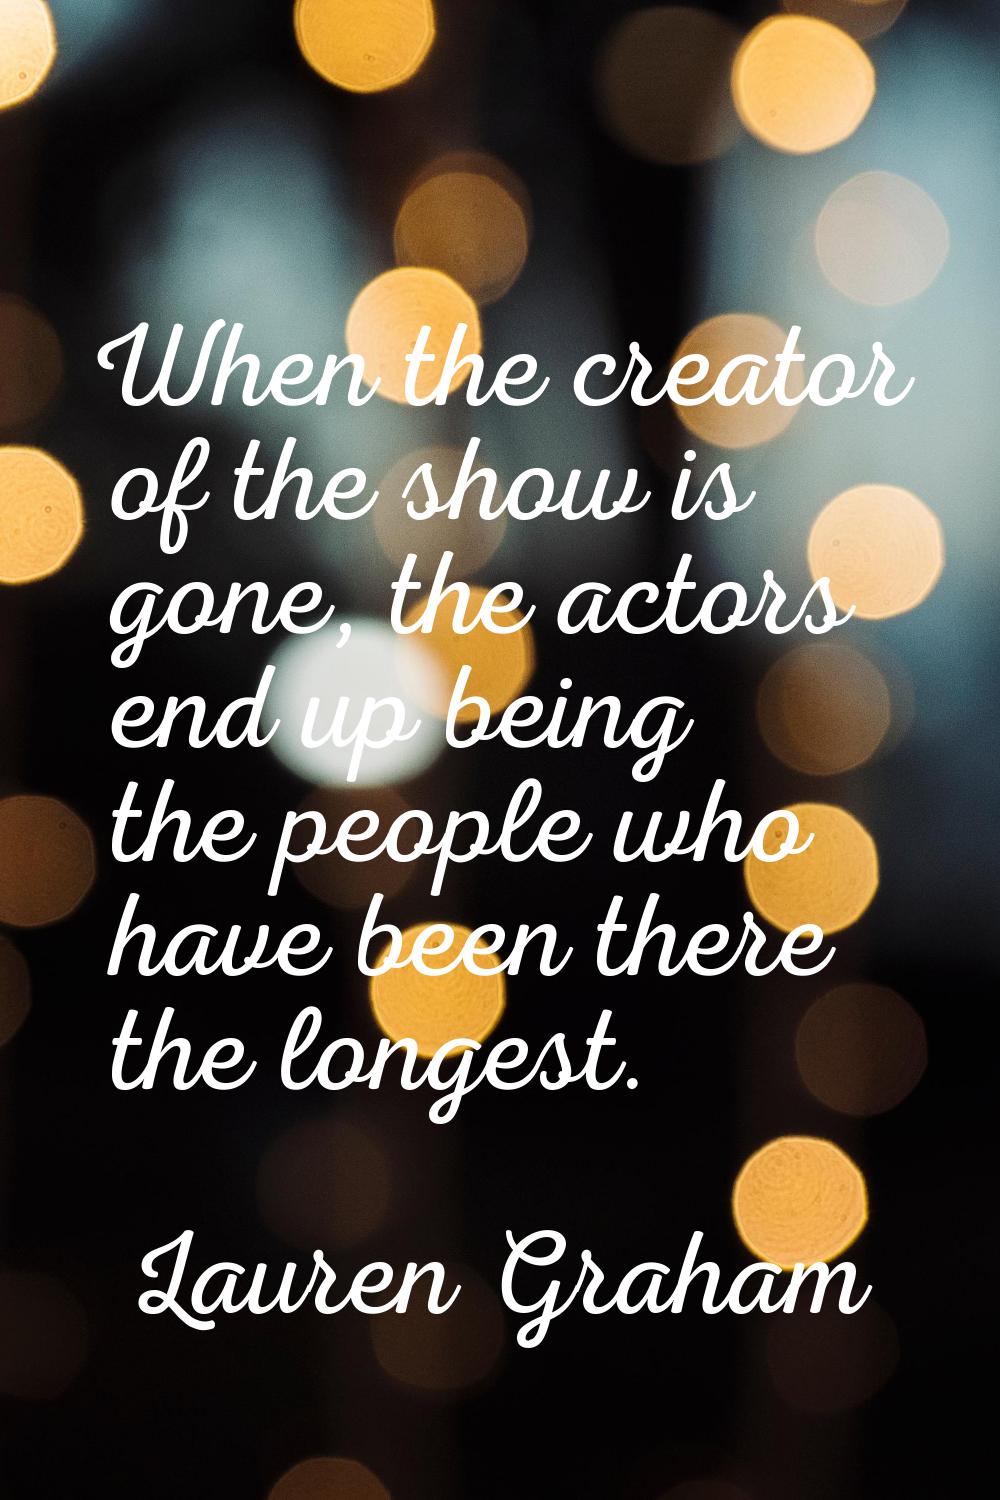 When the creator of the show is gone, the actors end up being the people who have been there the lo